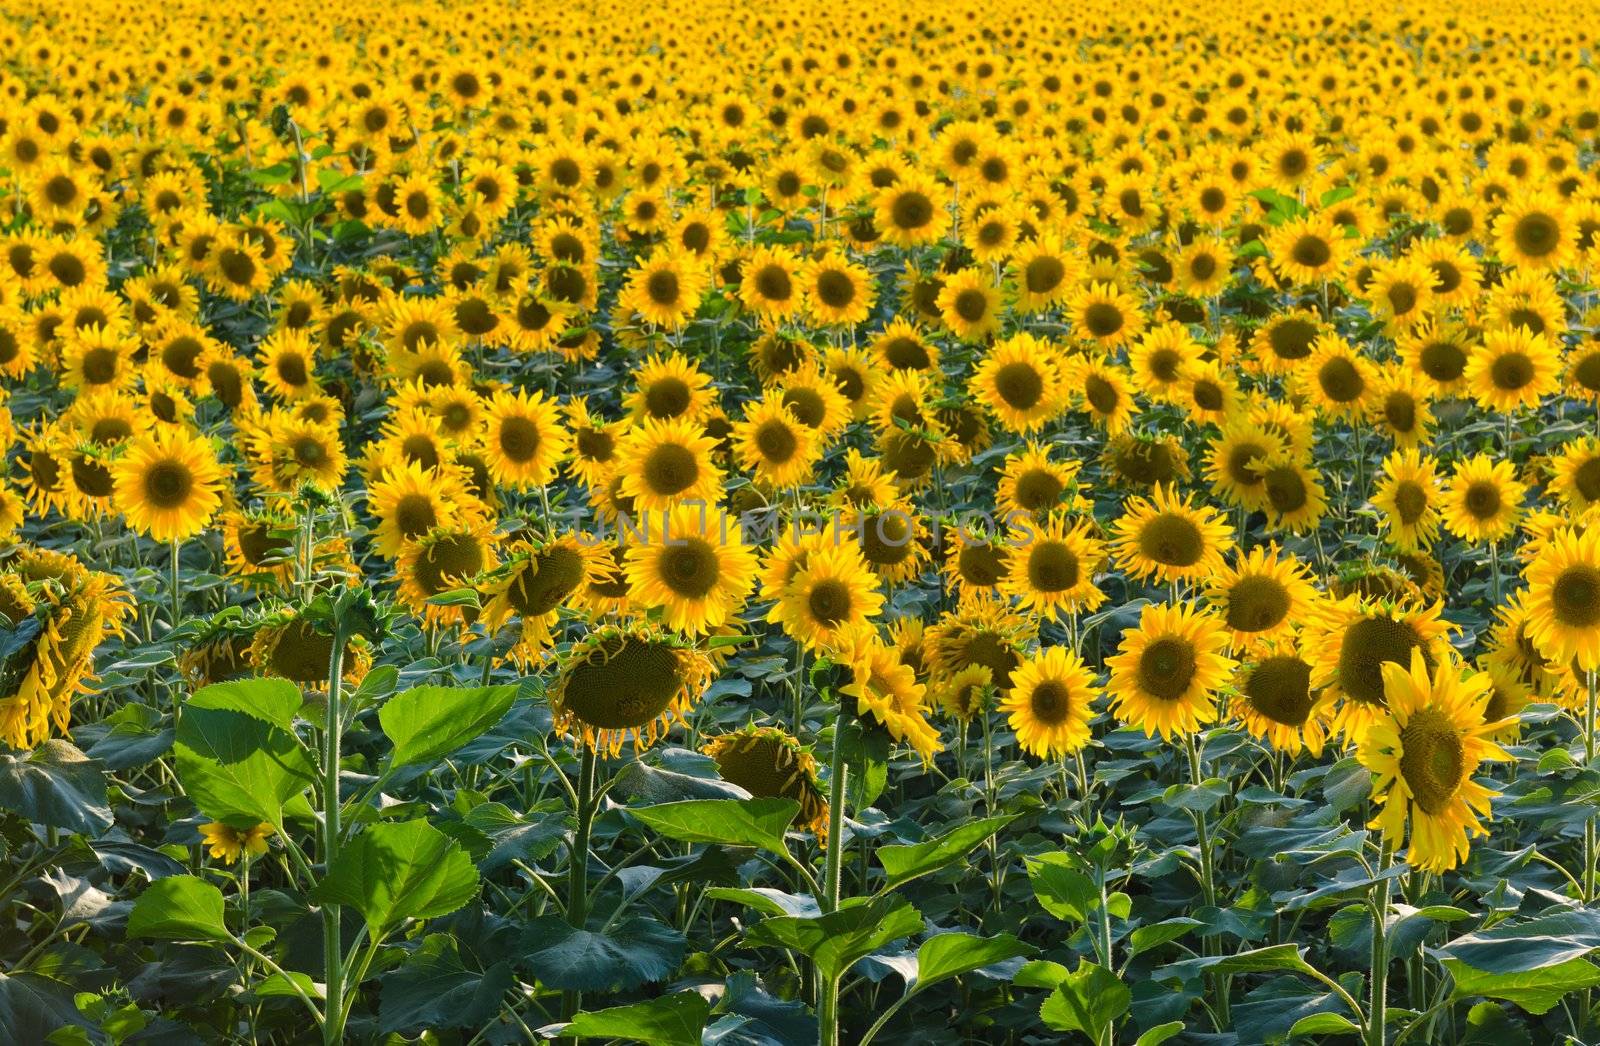 Field of sunflowers shot with no horizon to create endless effect